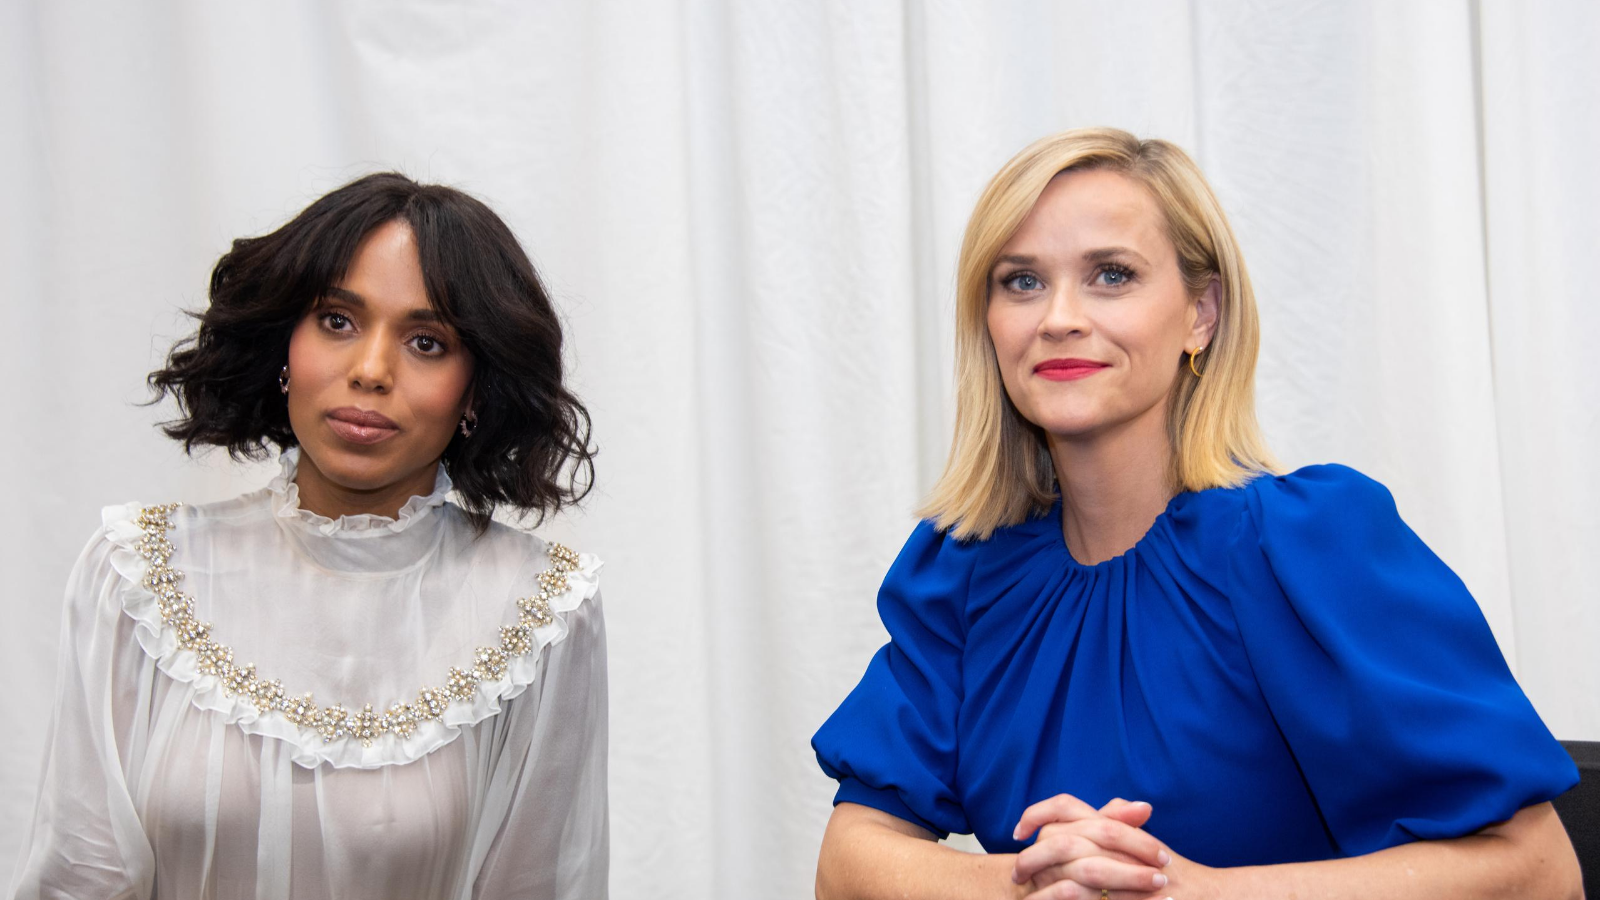 Kerry Washington i Reese Witherspoon (Fot. V E Anderson/WireImage)